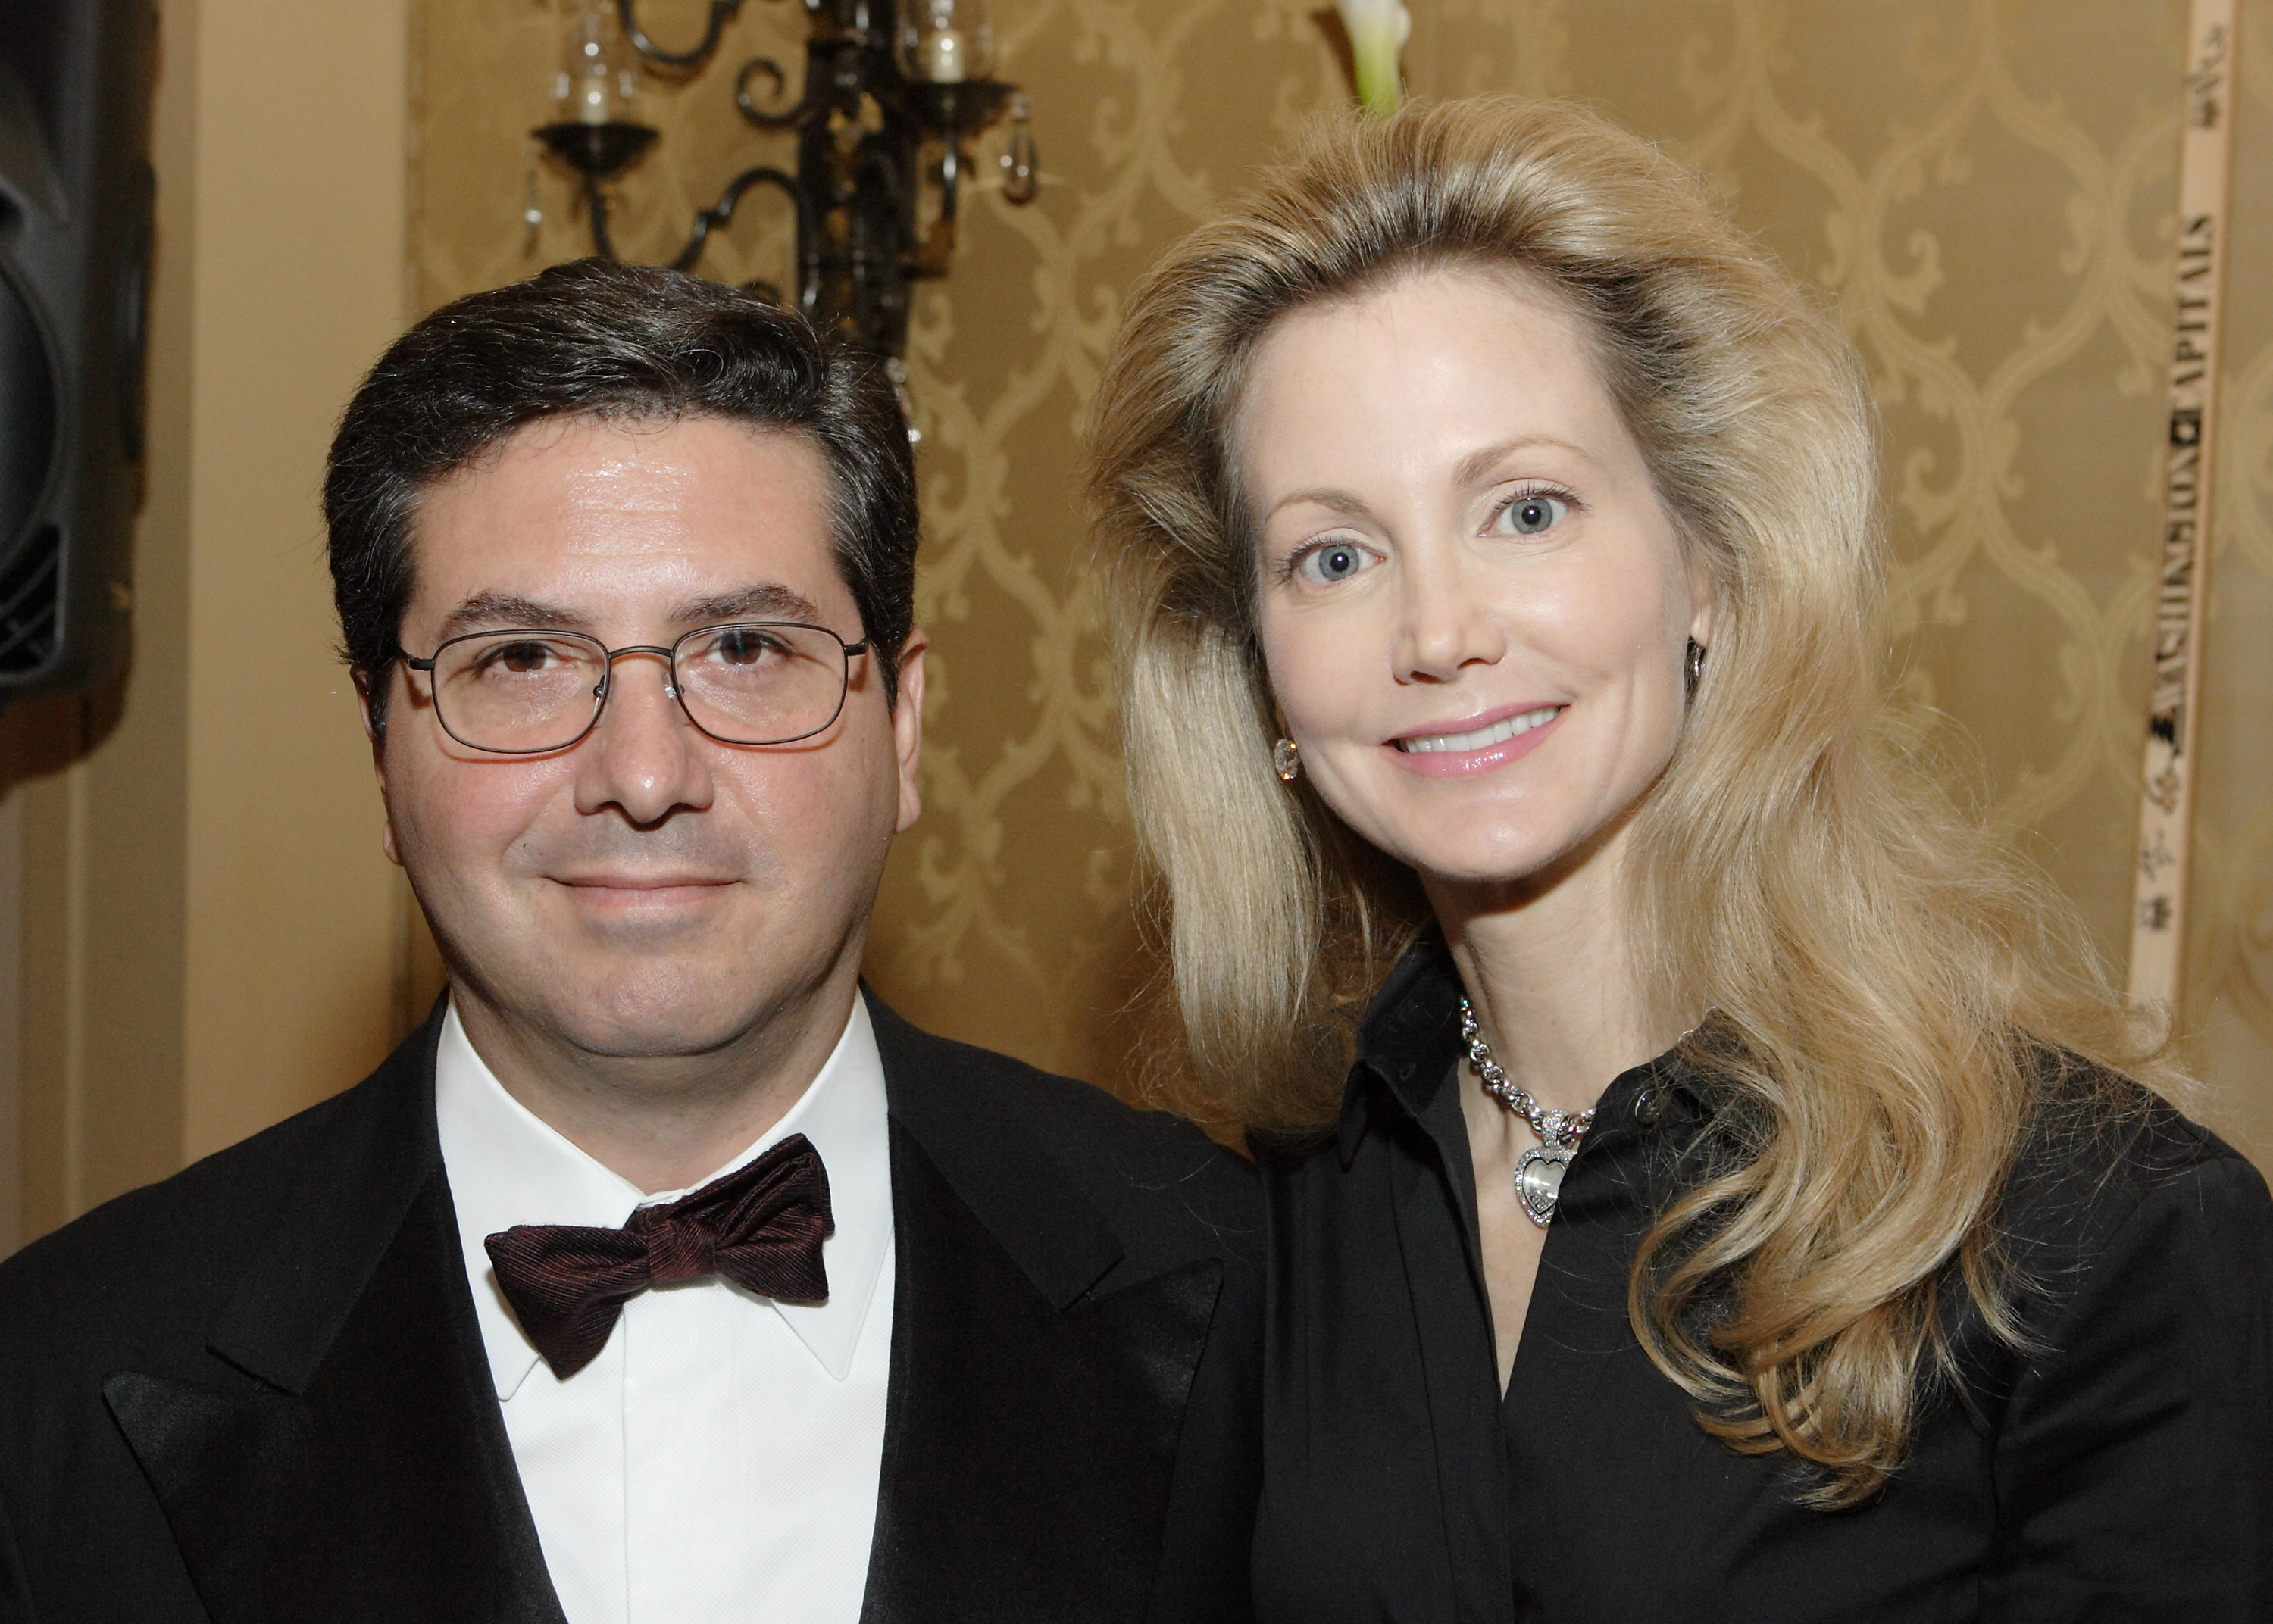 Dan Snyder 'Incredibly Proud to Recognize' Wife Tanya as New Co-CEO of WFT